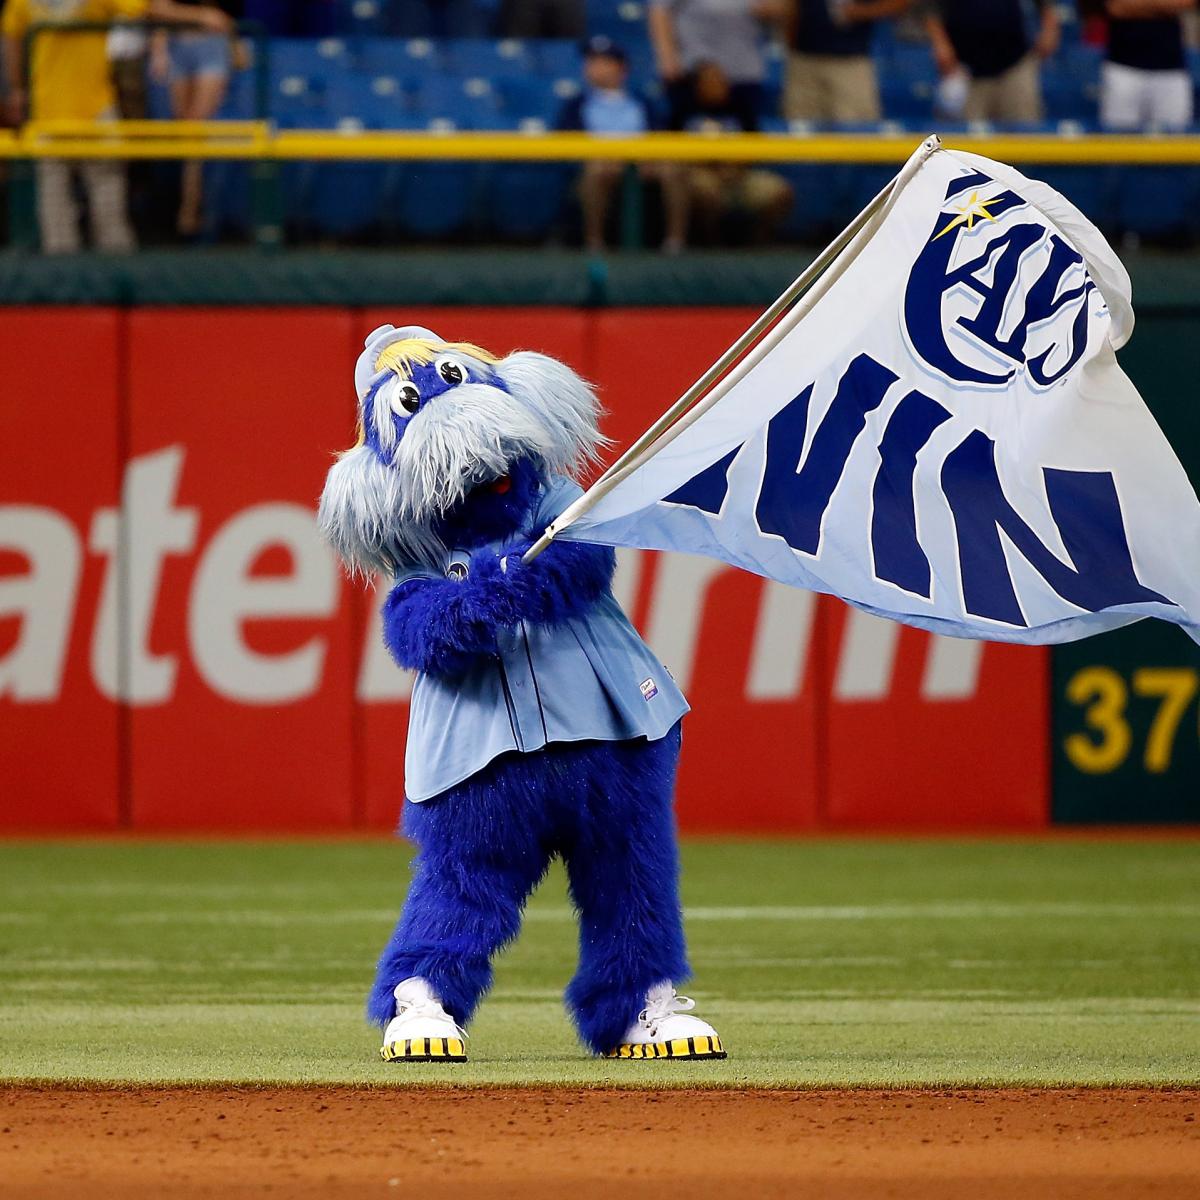 I don't understand the Tampa Bay Rays Mascots